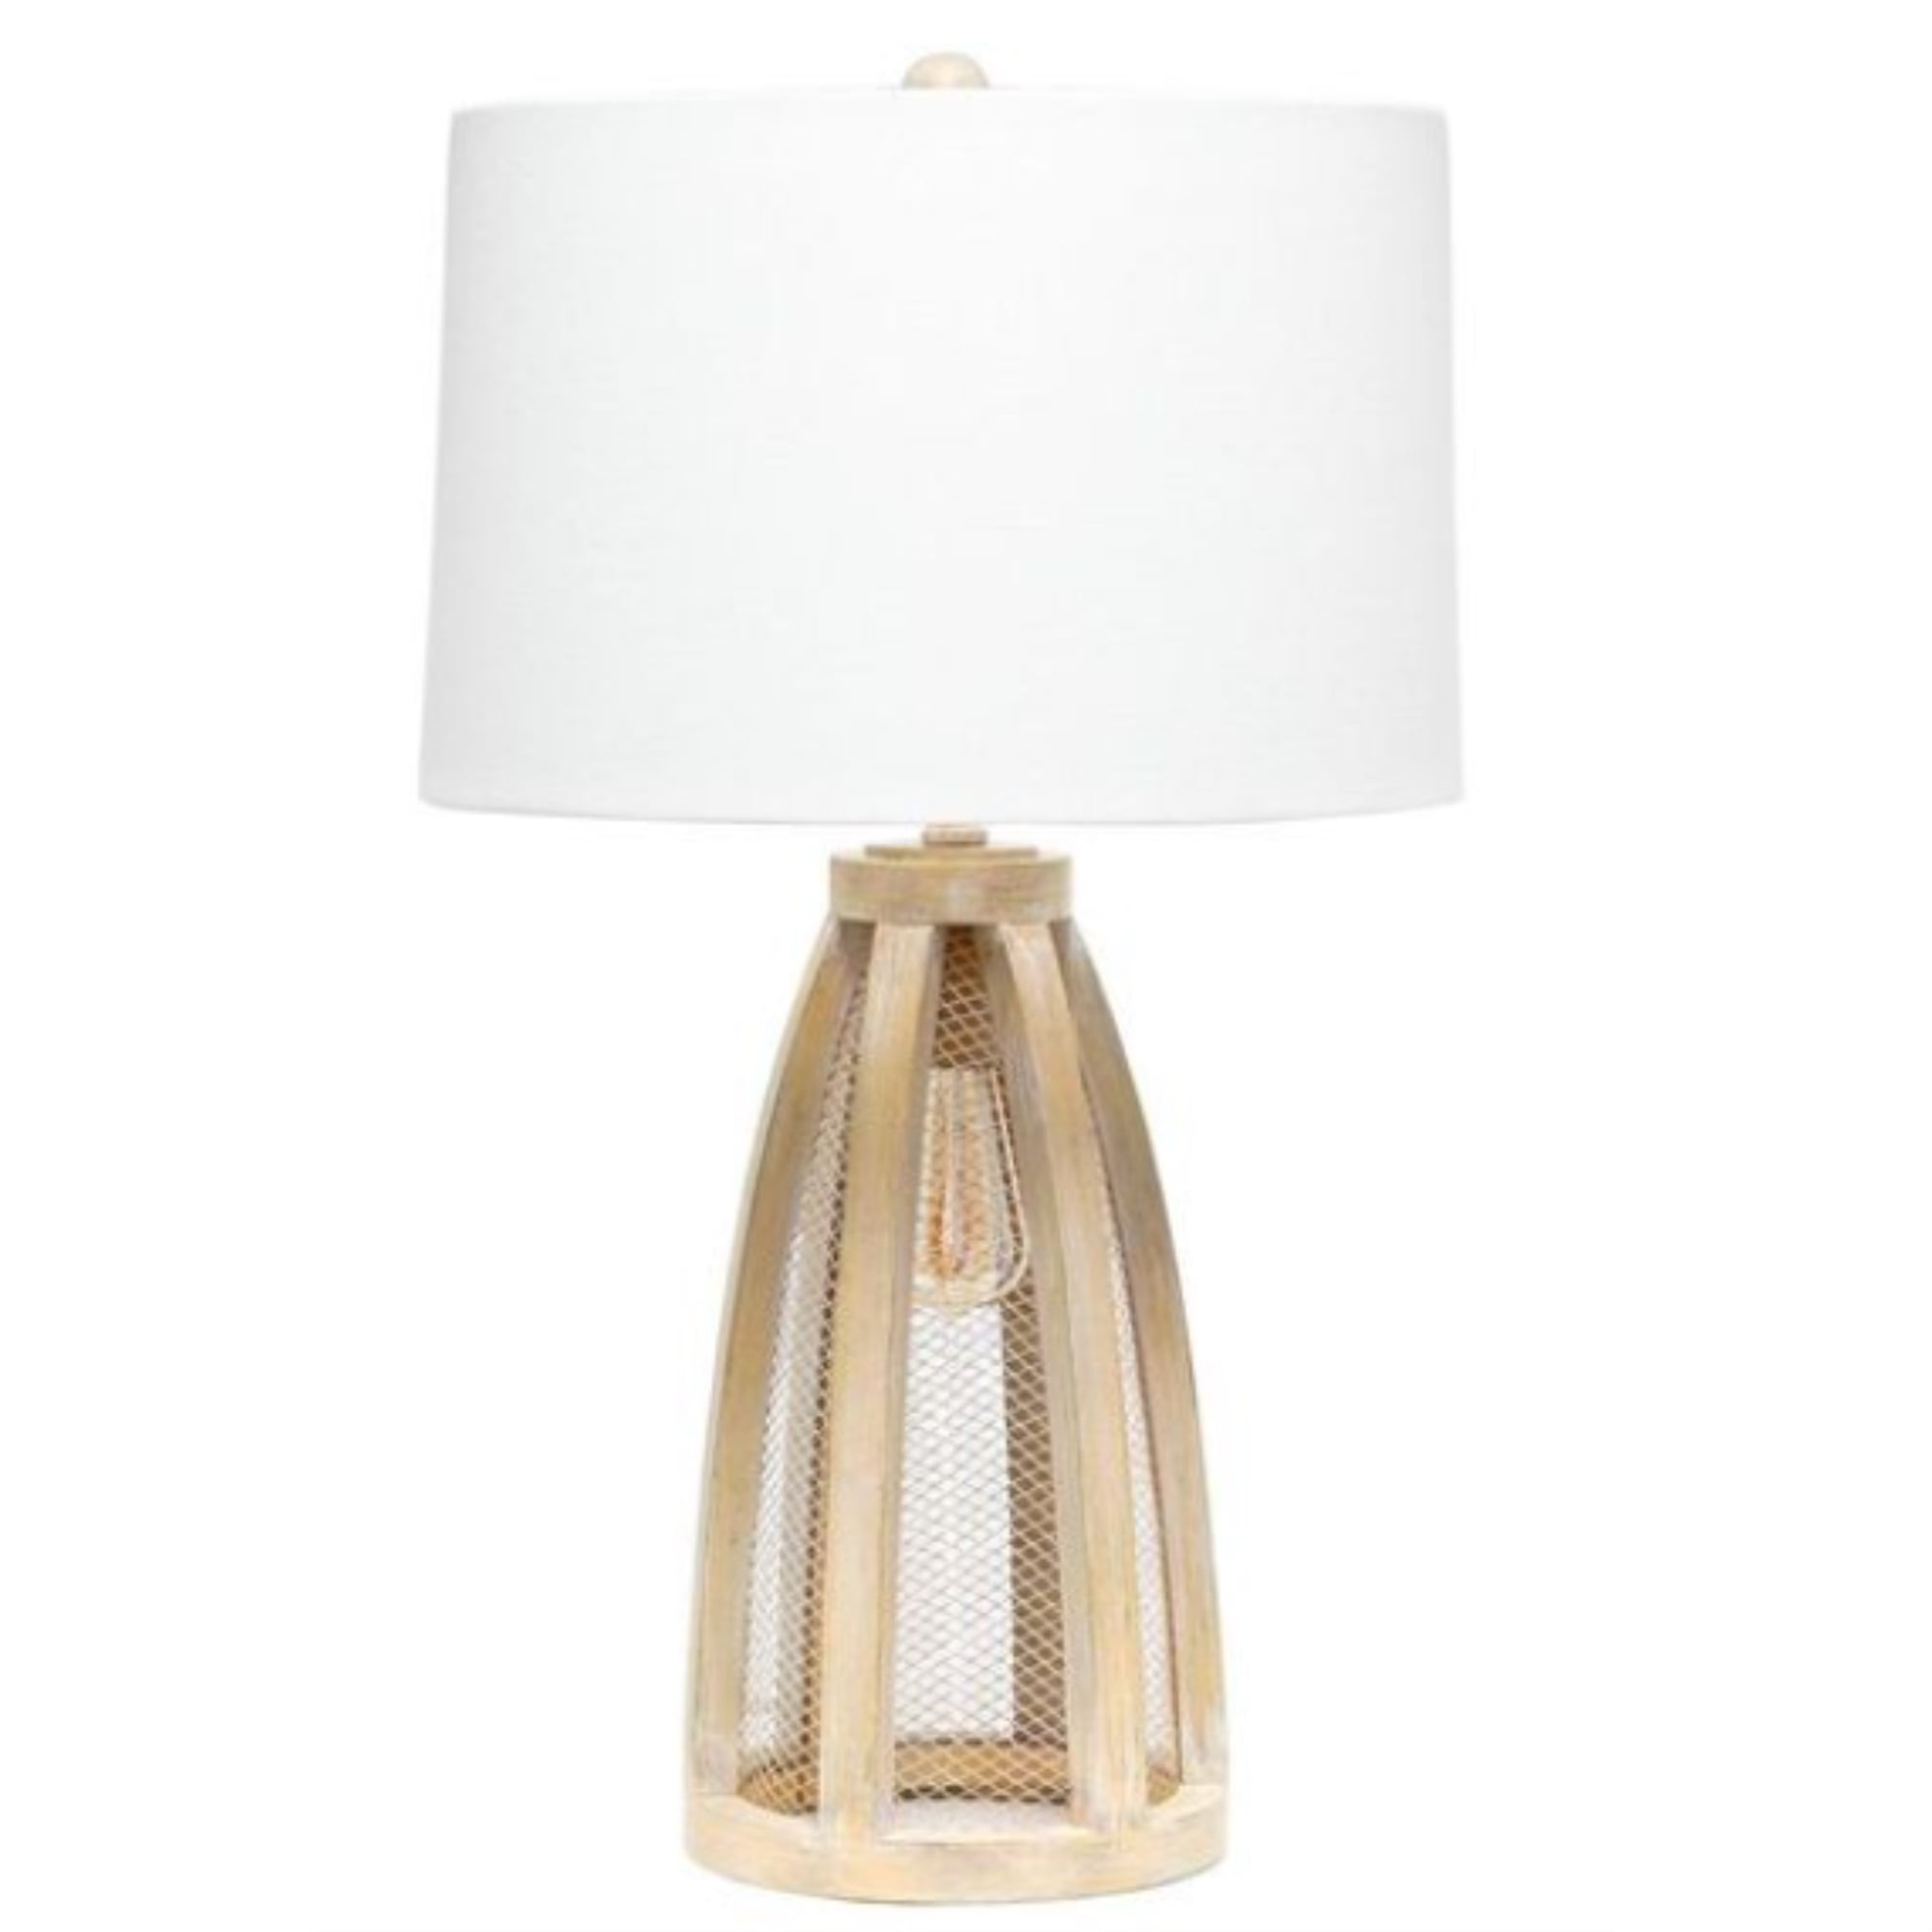  Lalia Home Wooded Arch Farmhouse Table Lamp with White Fabric Shade, Natural